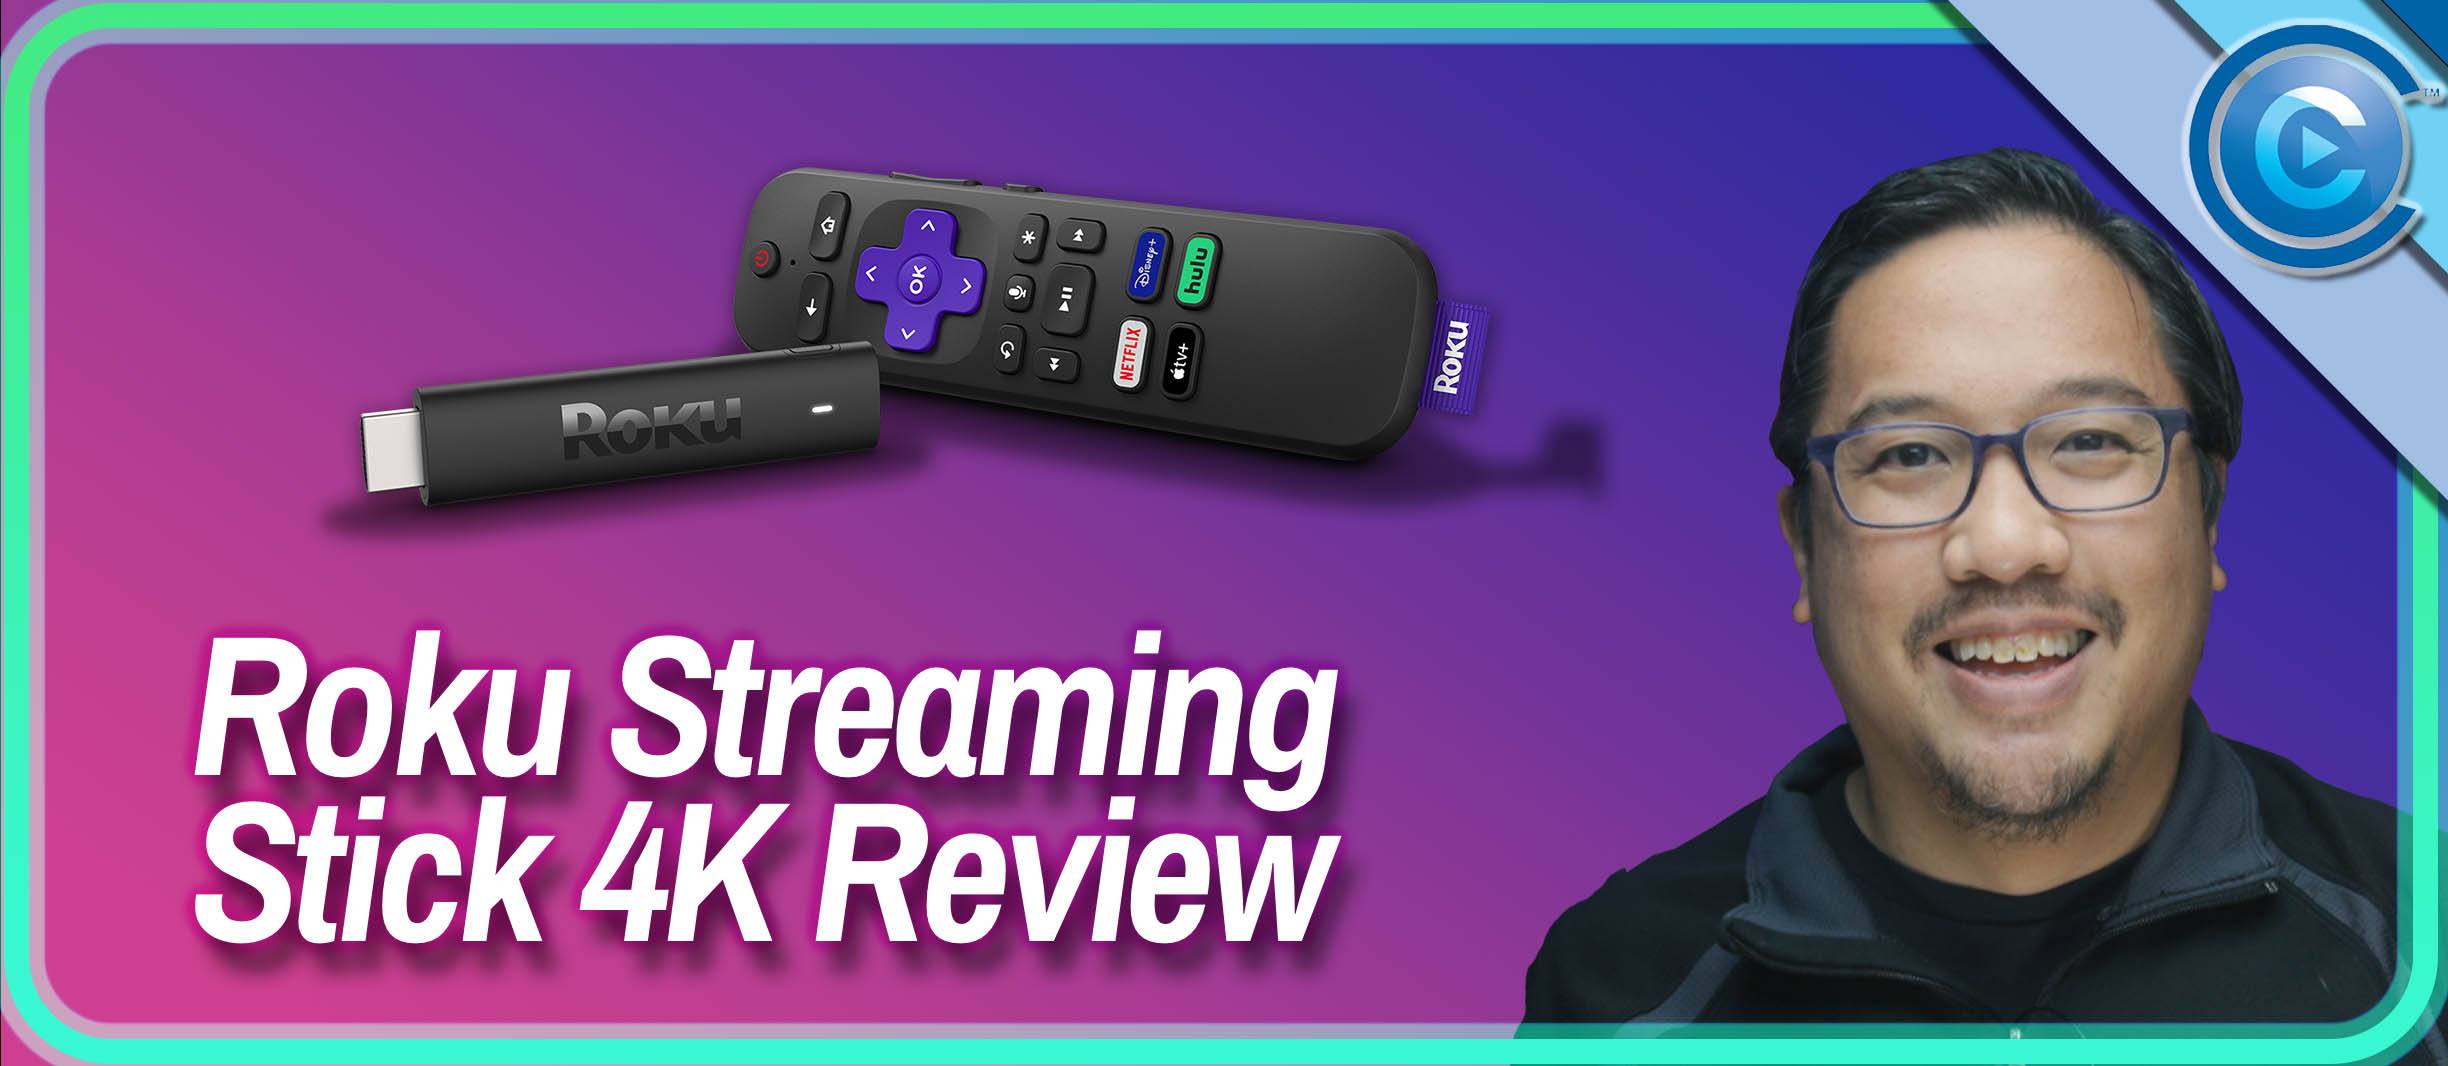 Video: The Roku Streaming Stick 4K is a Worthy Upgrade at a Solid Price